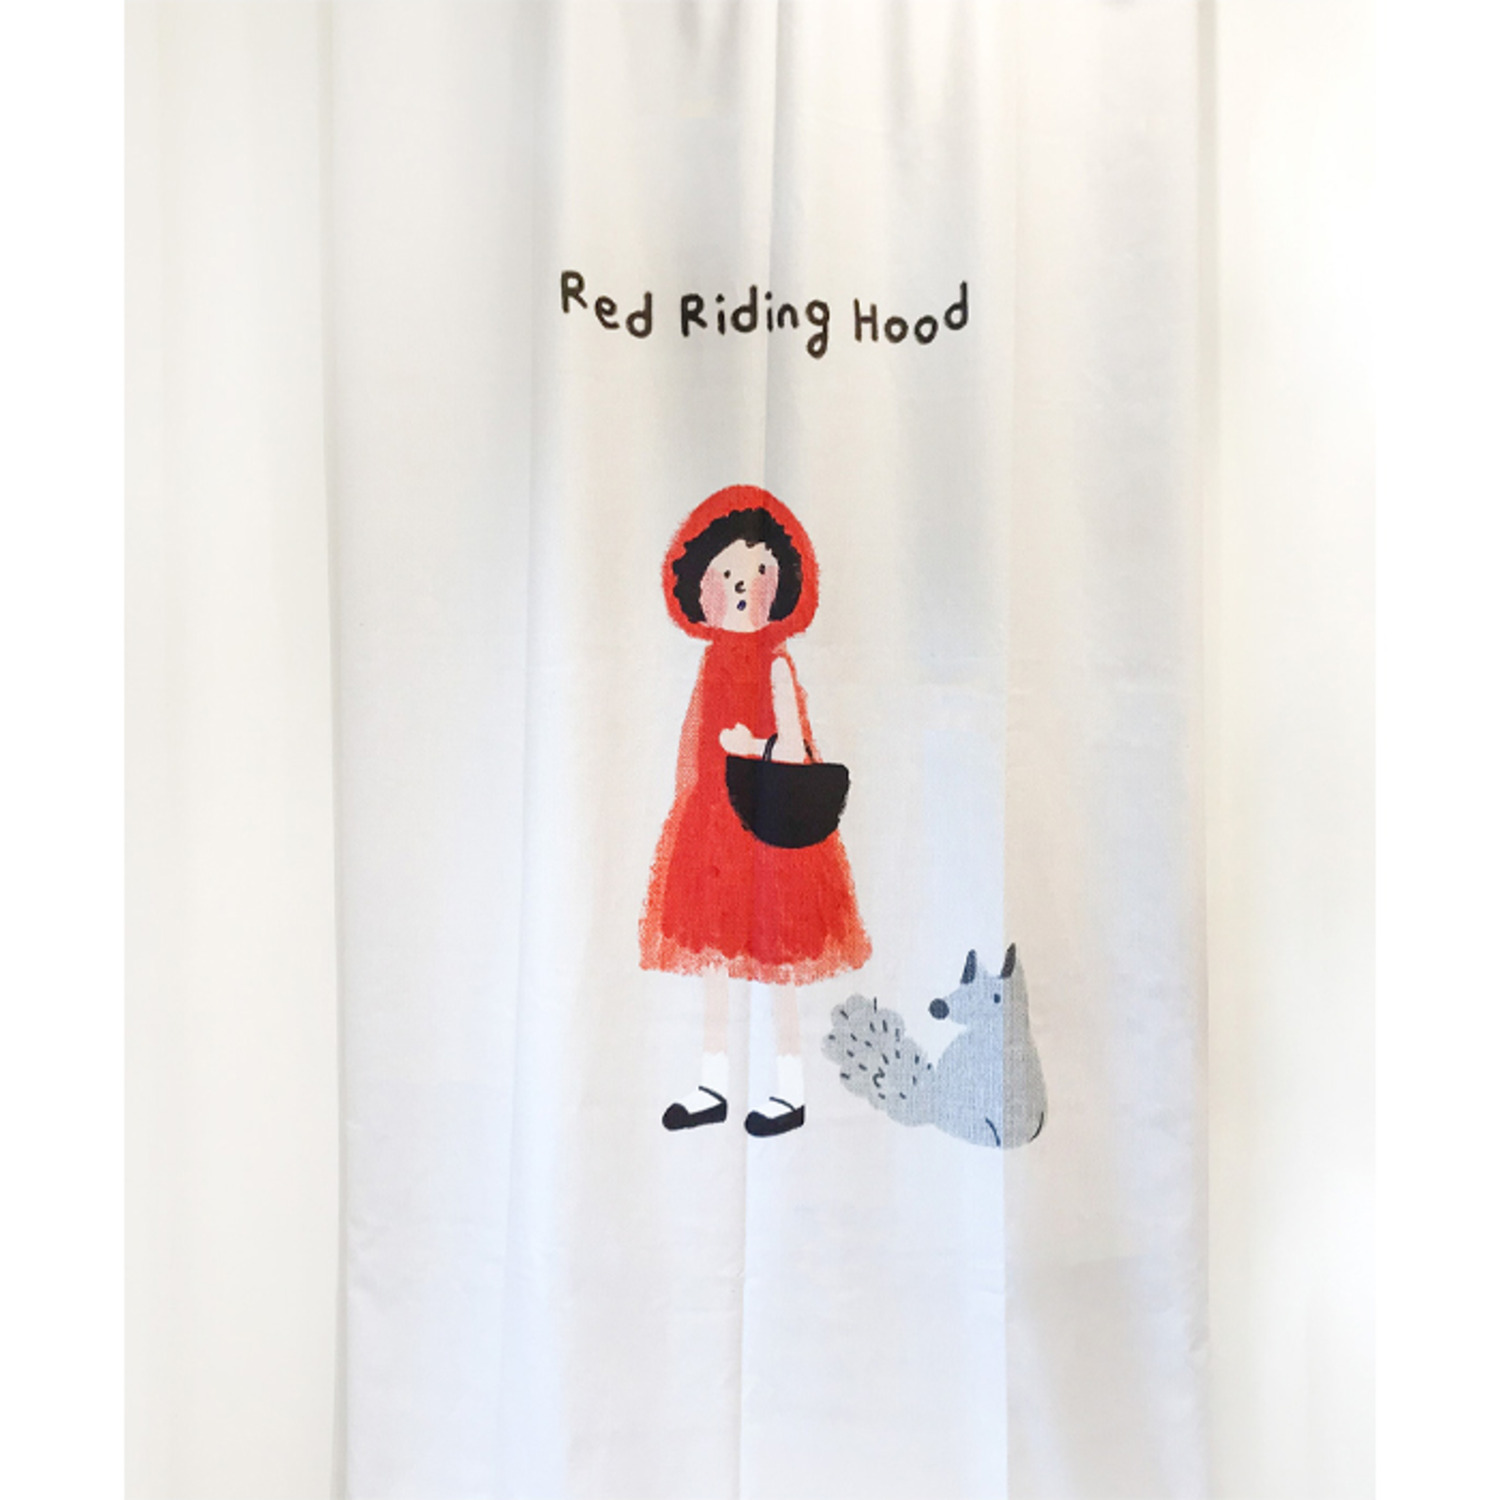 [drawing AMY] Red riding hood Curtain